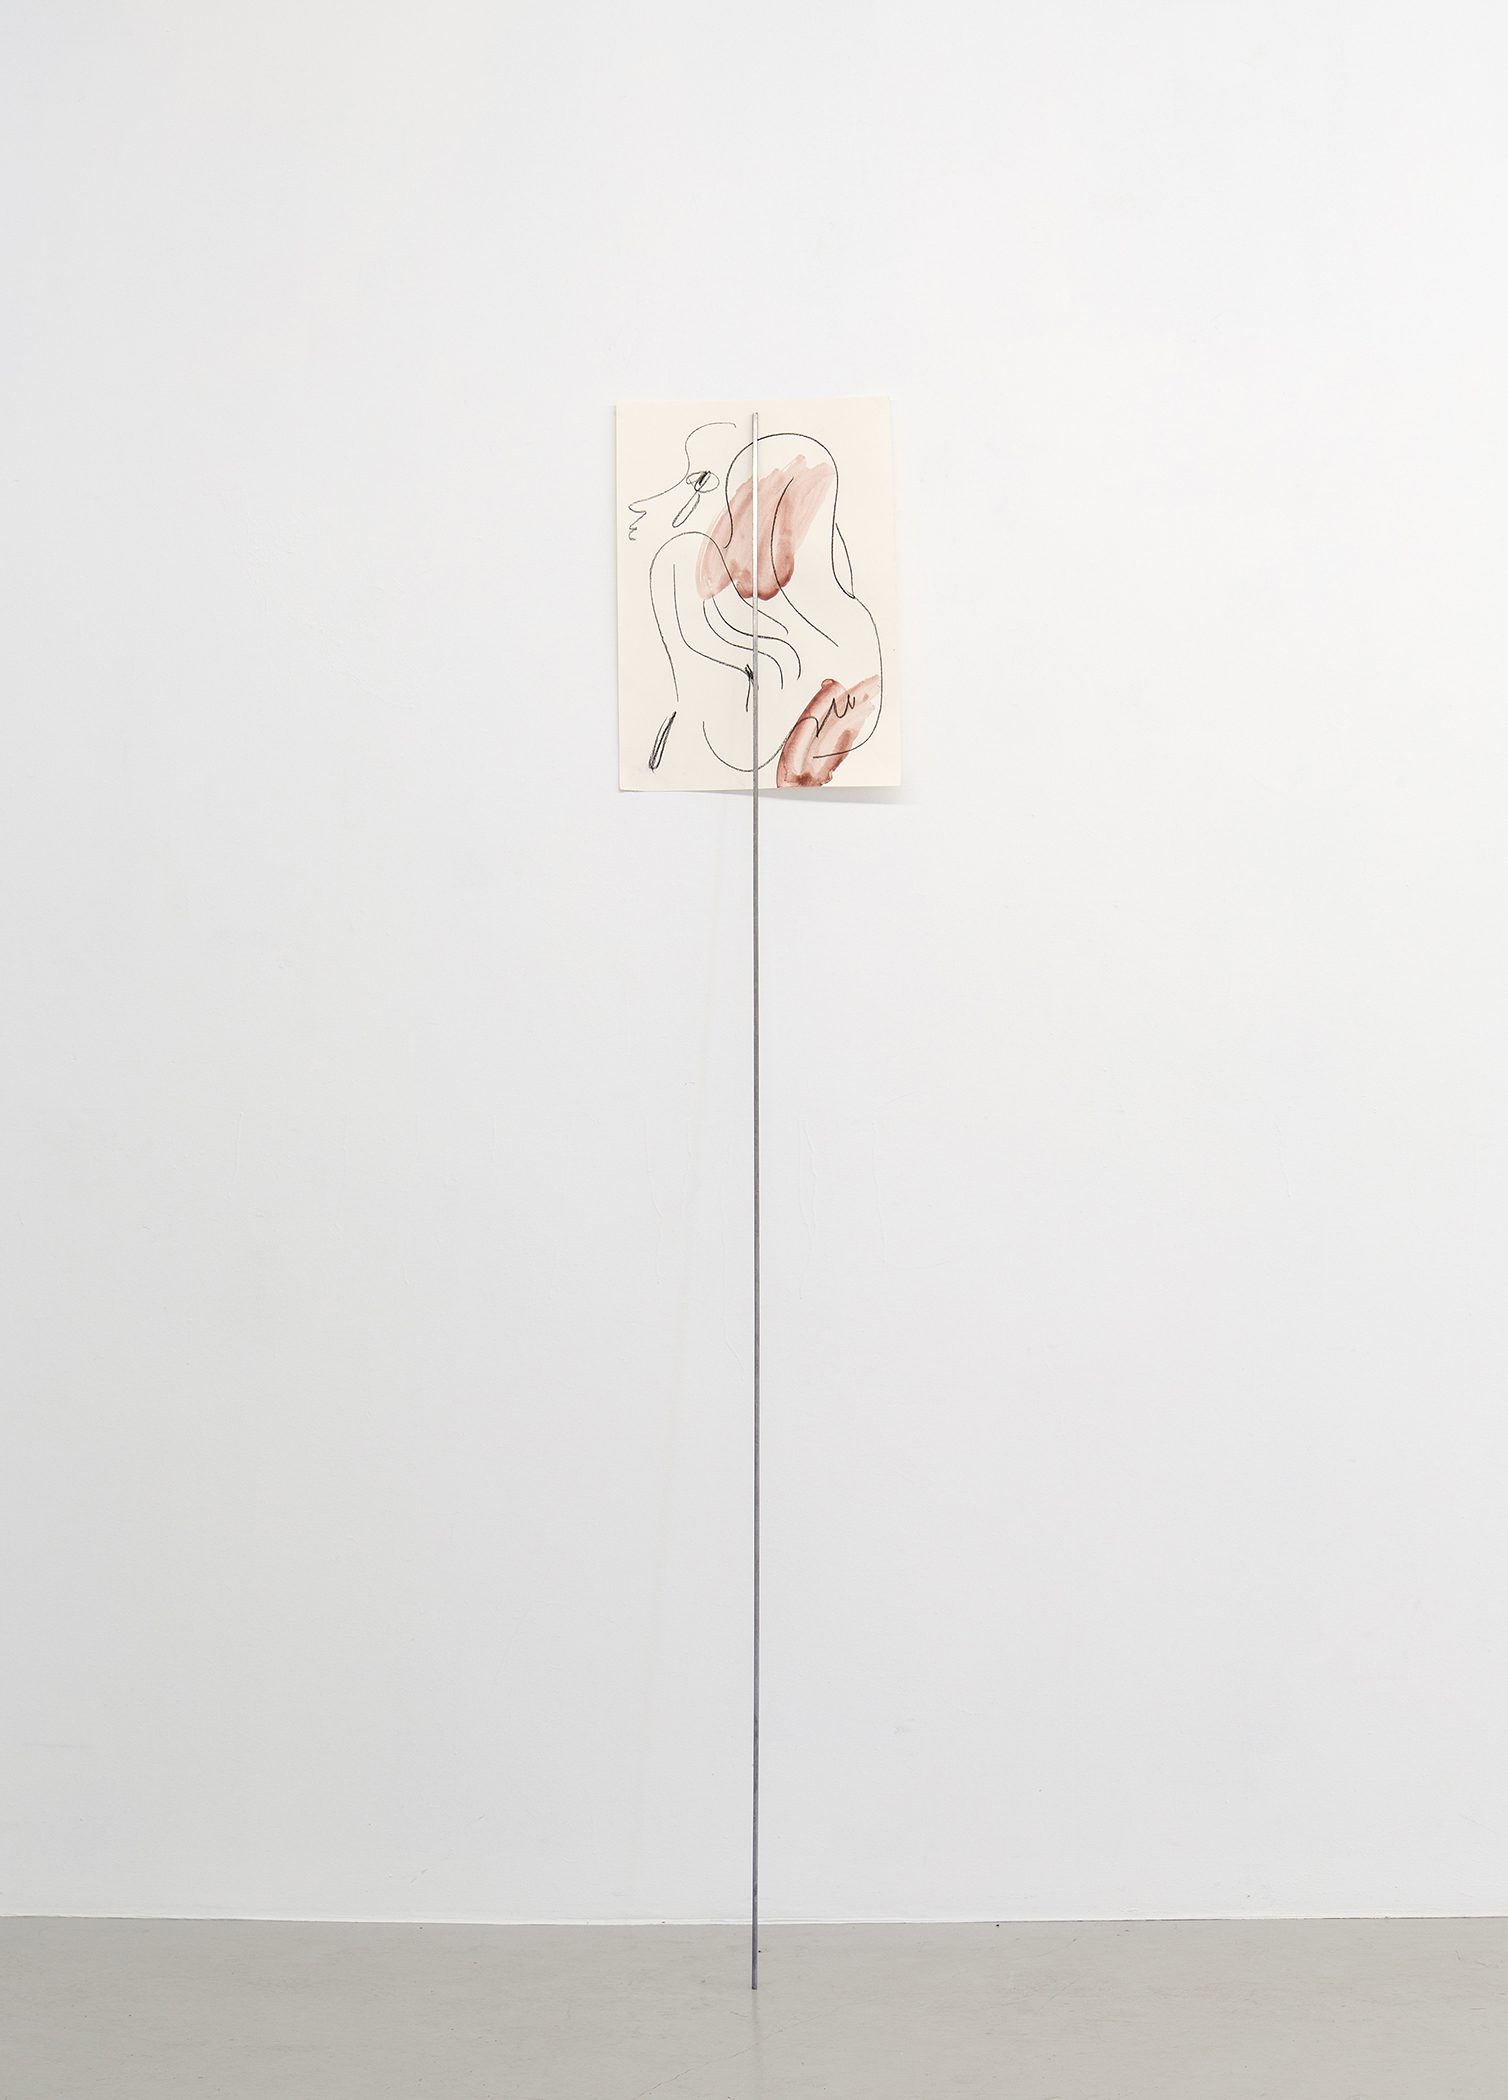  Alina Vergnano,  Untitled (Drawing) , 2019, Charcoal and watercolor on paper, steel bar, 35 x 50cm 